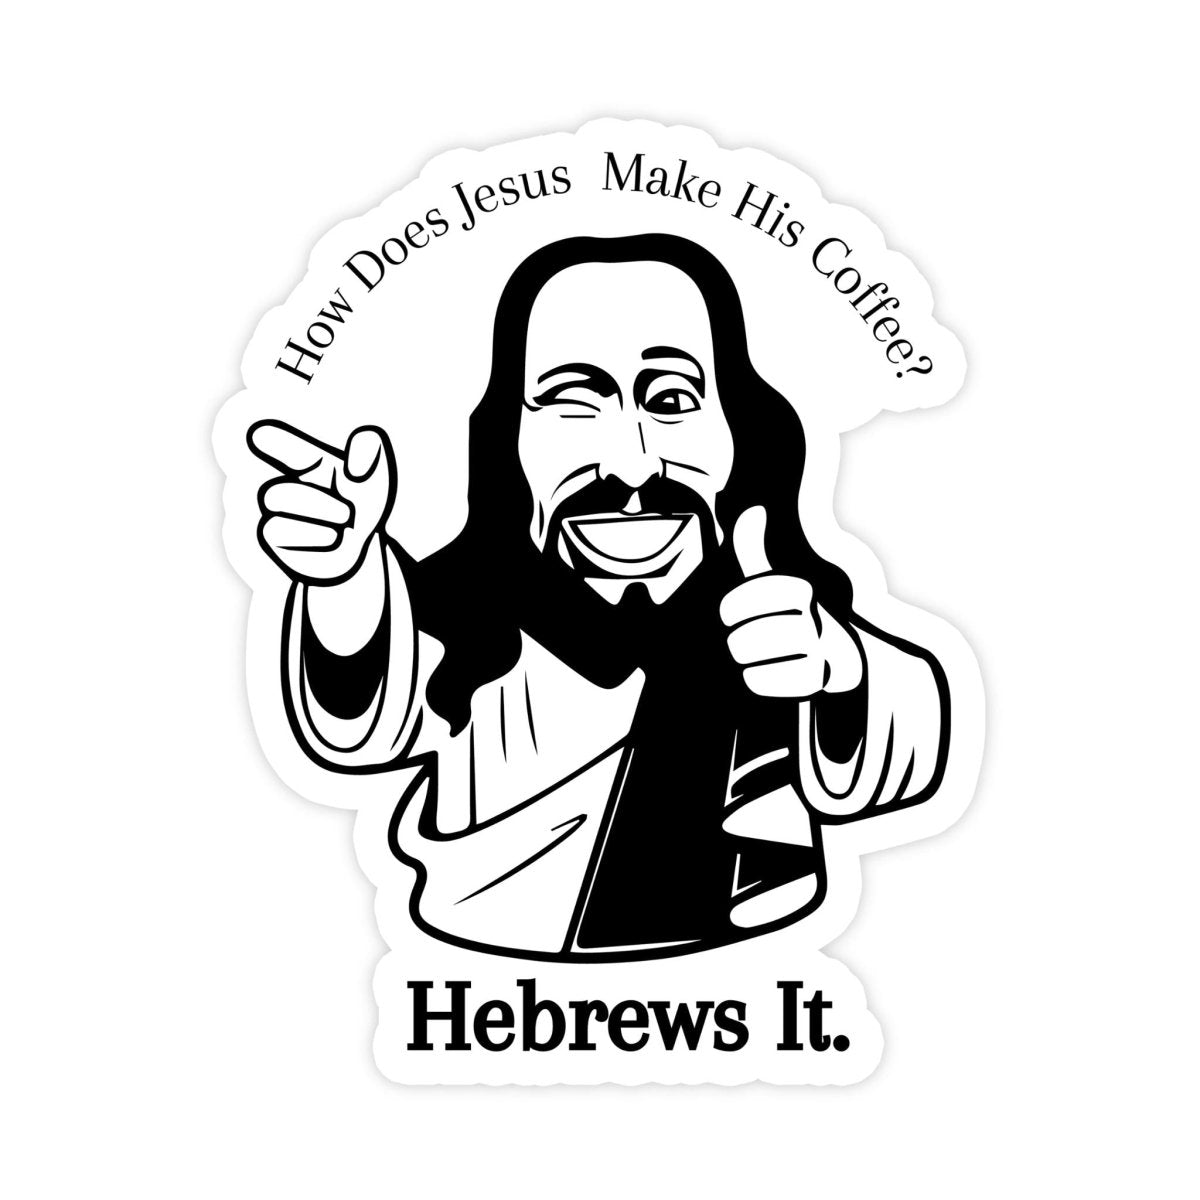 Cool Jesus Coffee Sticker - stickerbullCool Jesus Coffee StickerRetail StickerstickerbullstickerbullTaylor_JesusCoffeeBlack and white sticker of jesus doing a finger point with text that reads "How does jesus make his coffee? Hebrews it"